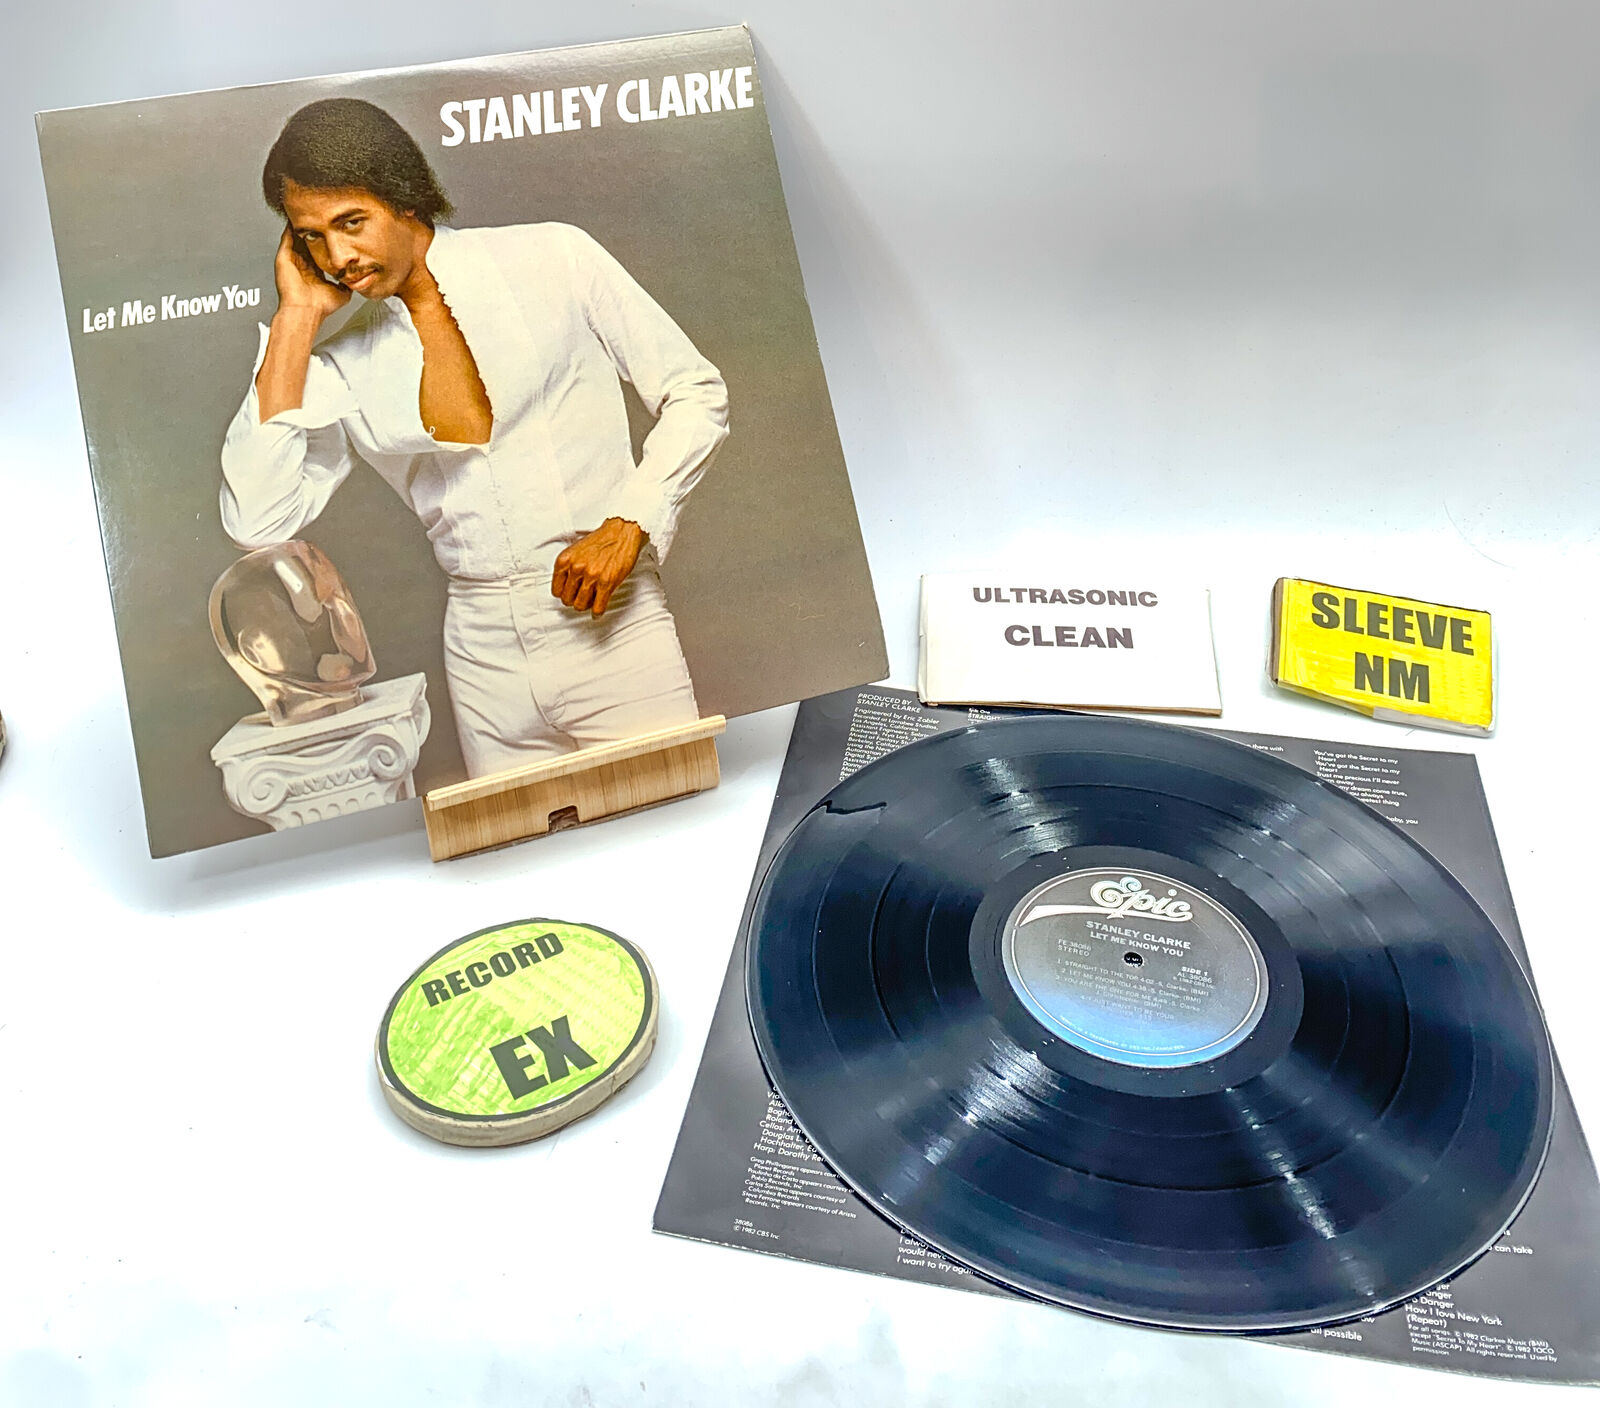 Stanley Clarke Let Me Know You -  EX/NM  FE 38086 Ultrasonic Clean